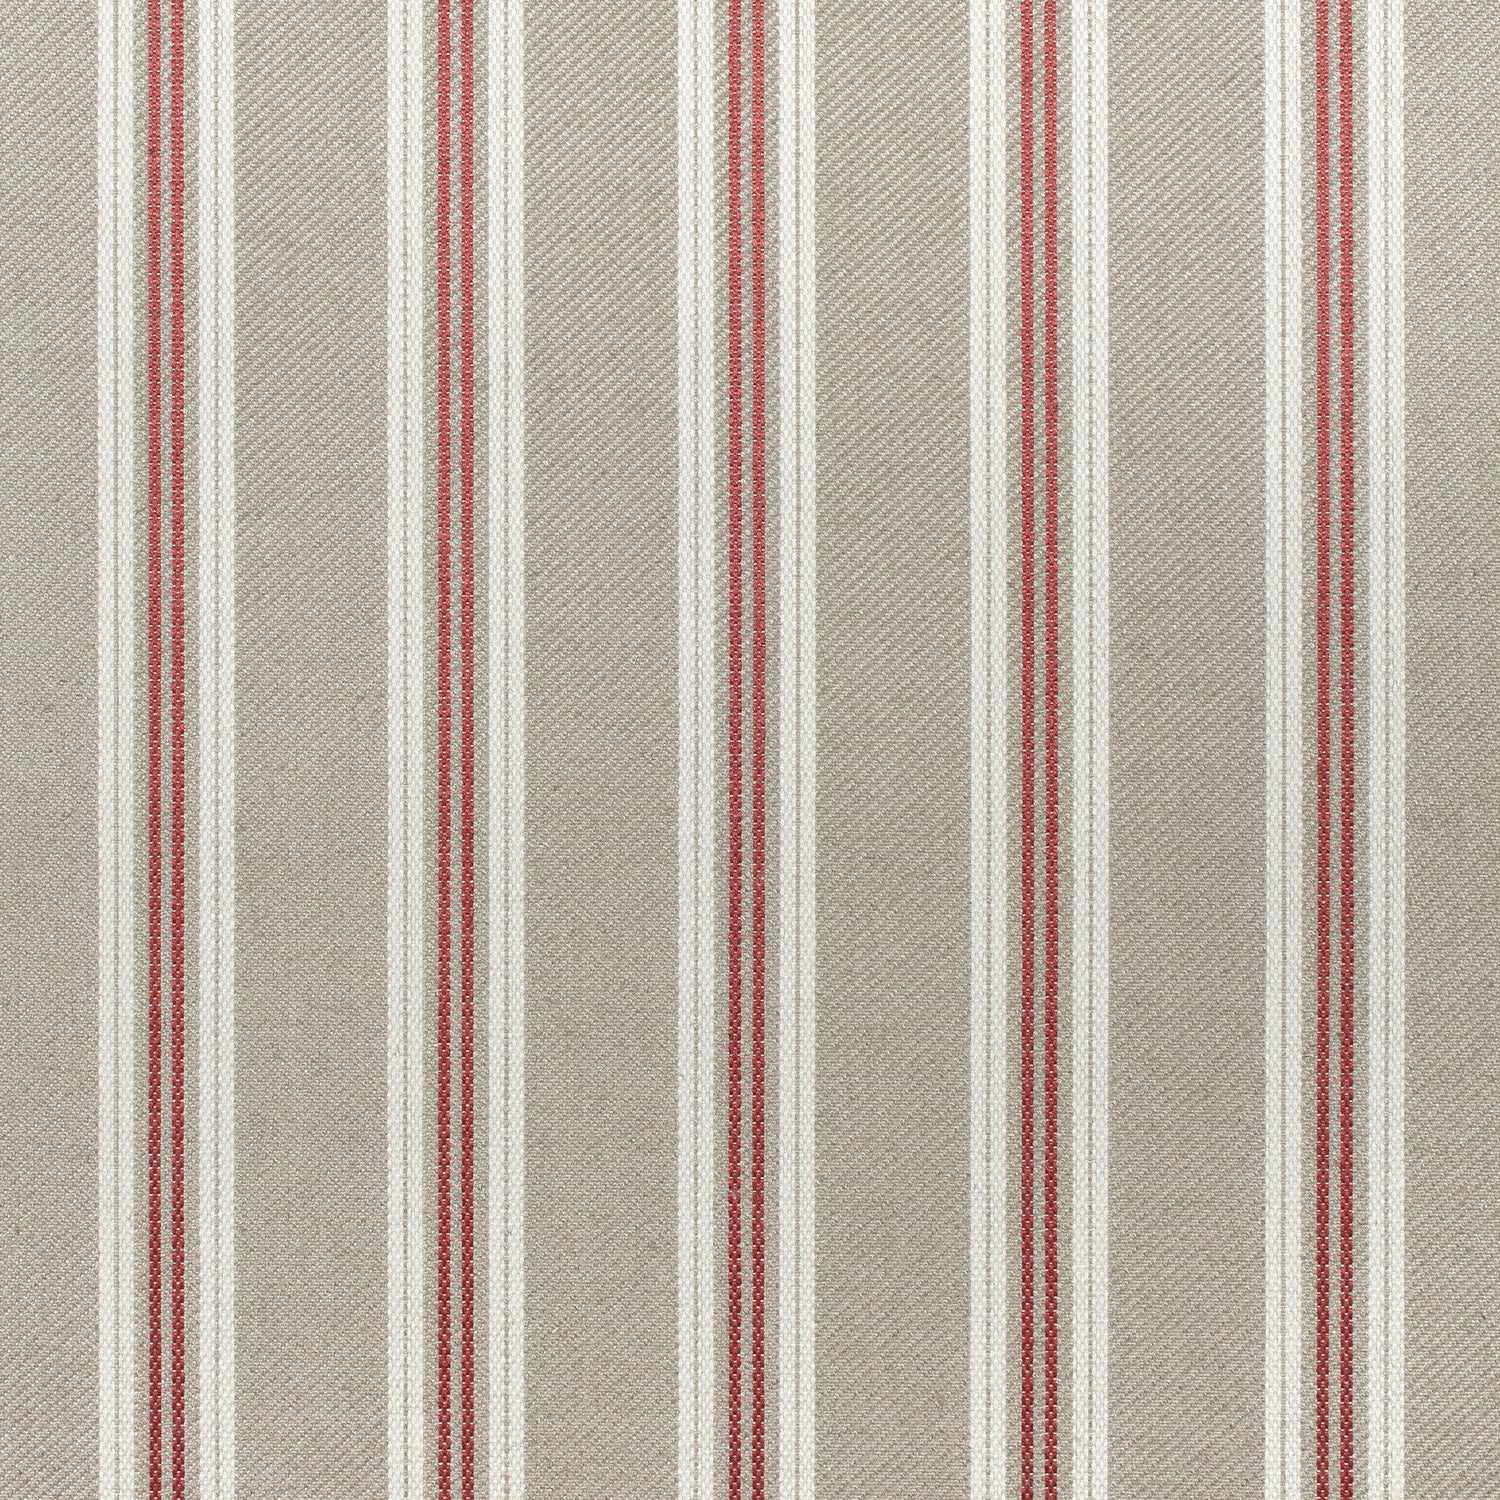 Colonnade Stripe fabric in cardinal color - pattern number W80736 - by Thibaut in the Woven Resource 11: Rialto collection